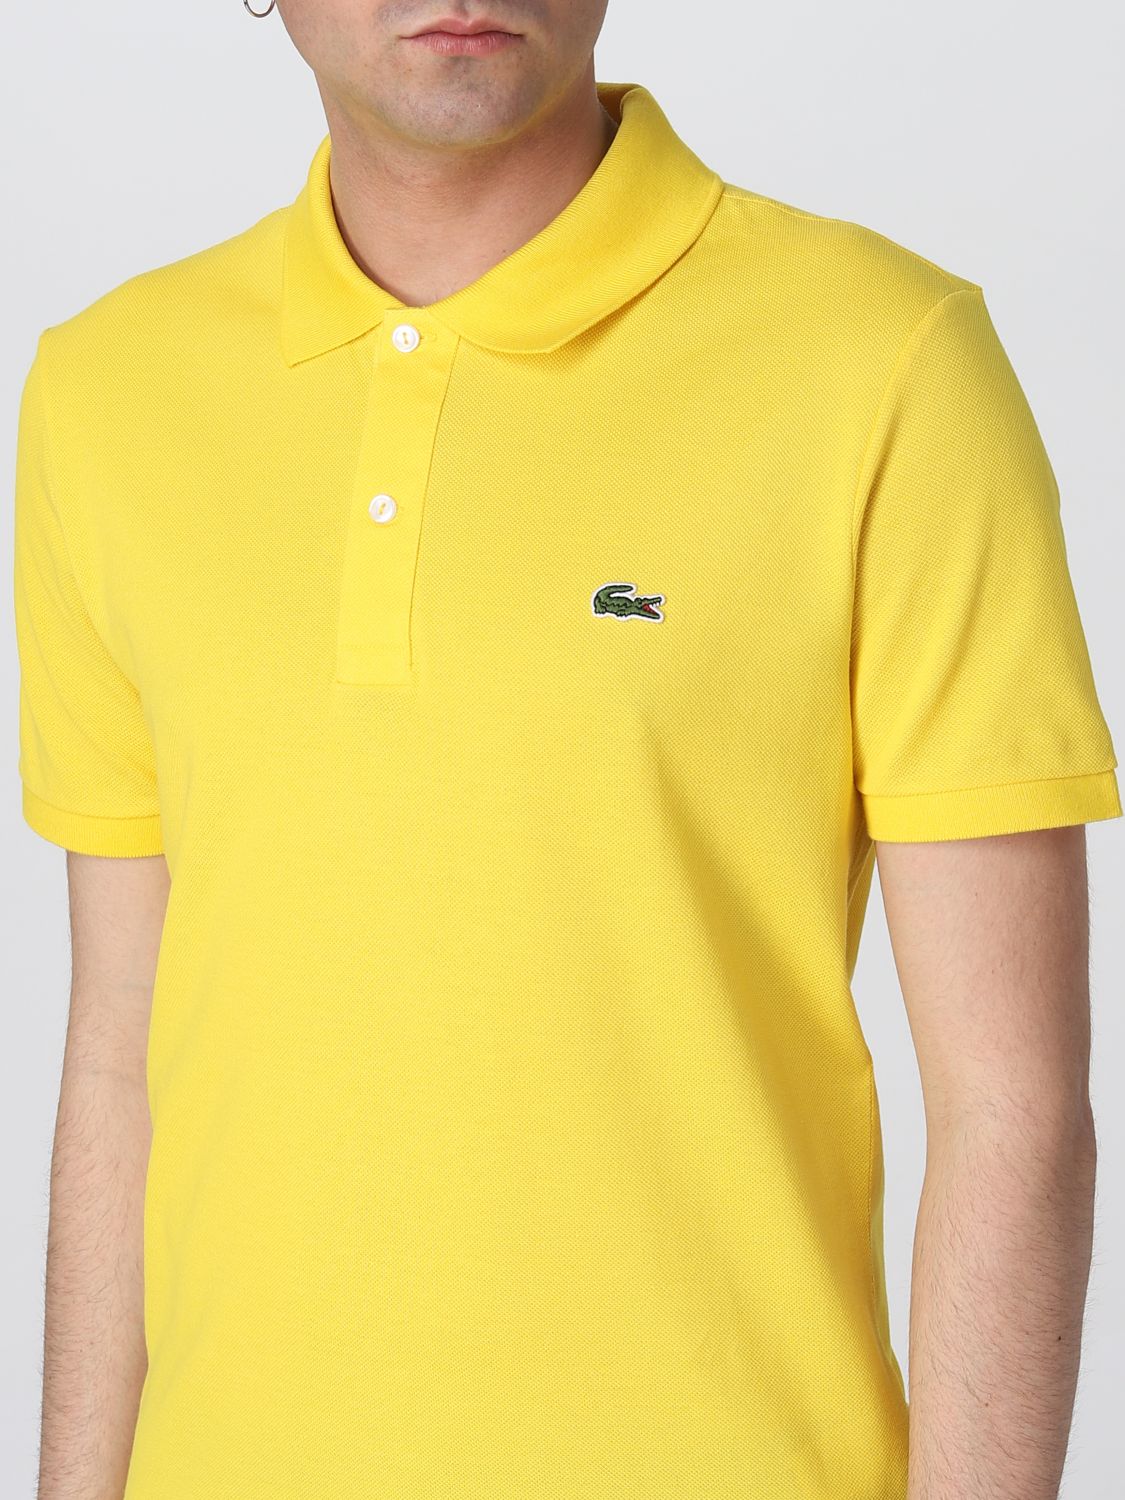 LACOSTE: polo shirt for man - Yellow | Lacoste polo shirt PH4012 online ...